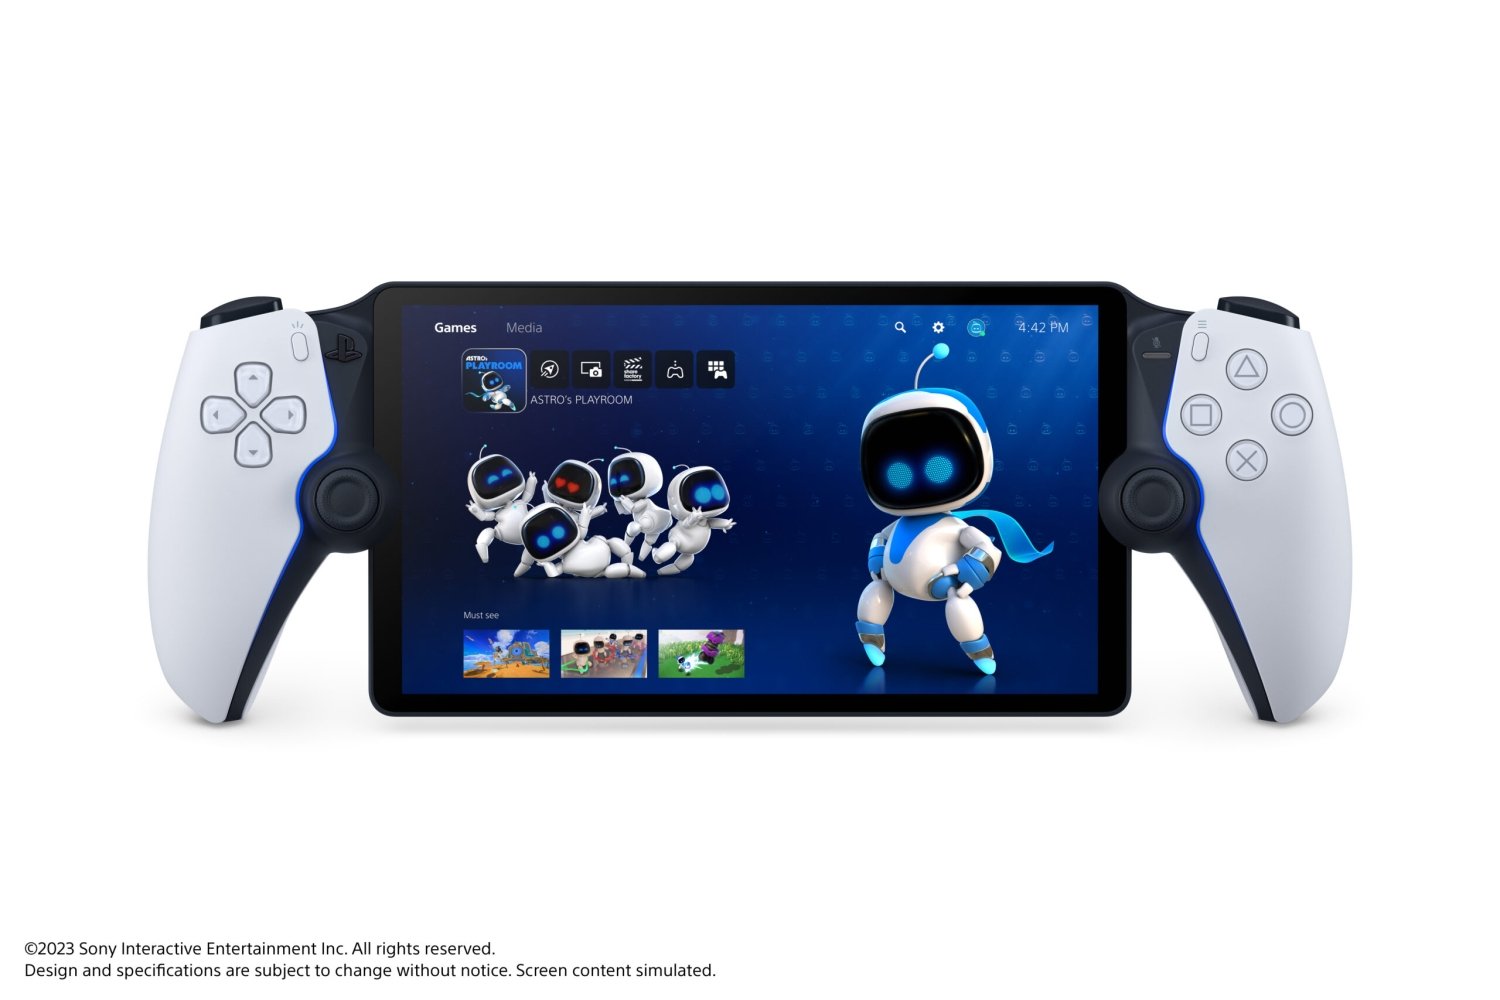 https://static.tweaktown.com/news/9/2/92992_2_sonys-new-playstation-portal-ps5-remote-play-handheld-coming-in-2023-for-199_full.jpg